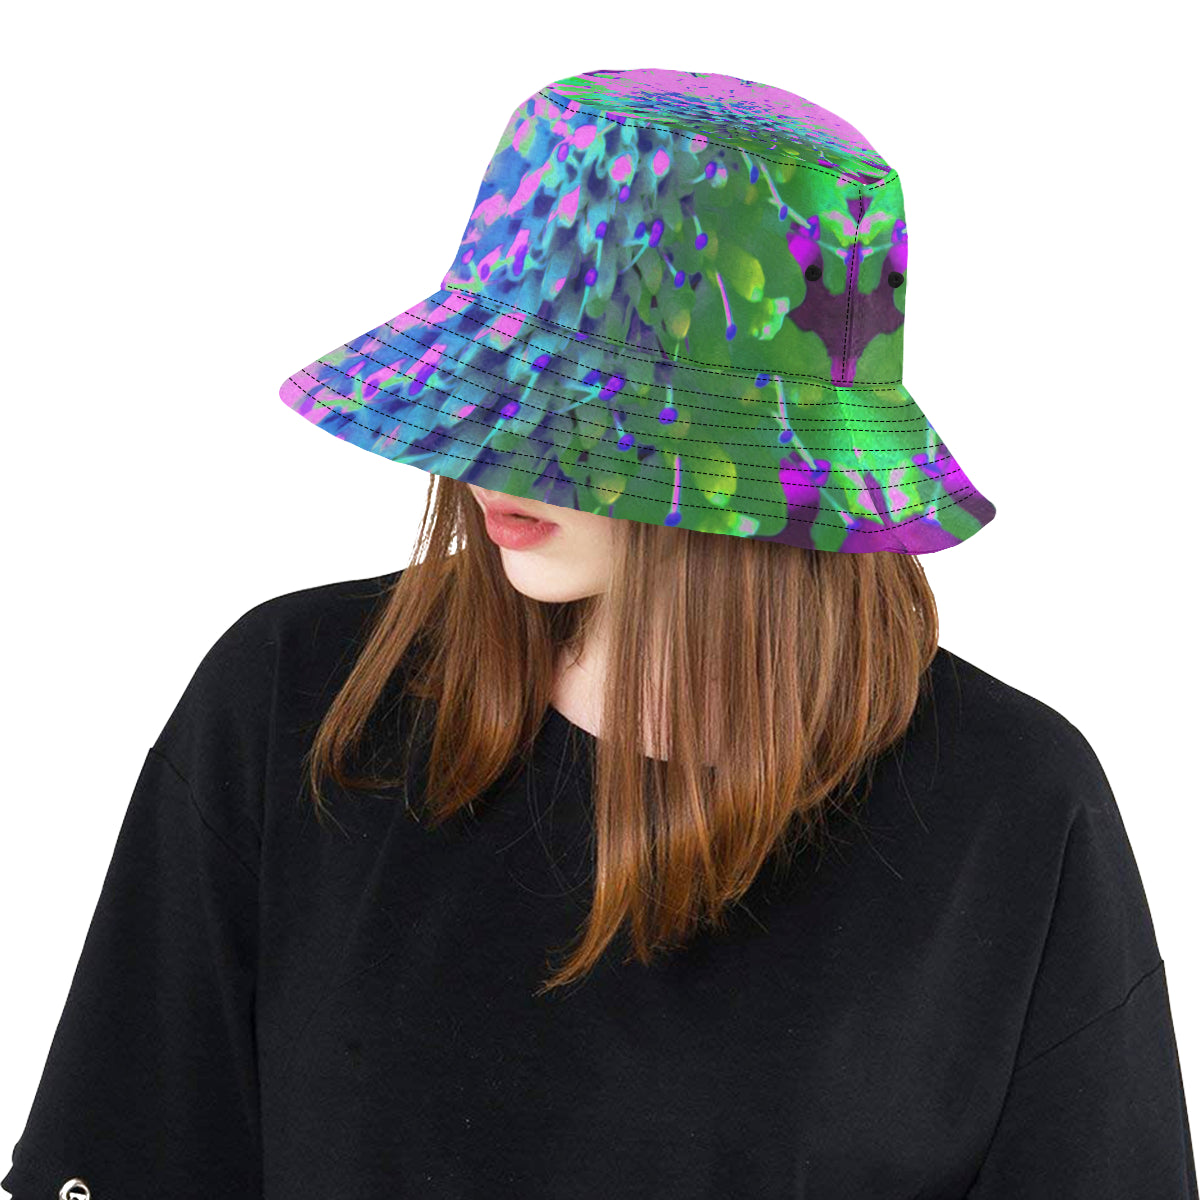 Bucket Hat, Abstract Pincushion Flower in Pink Blue and Green, Colorful Hat for Women